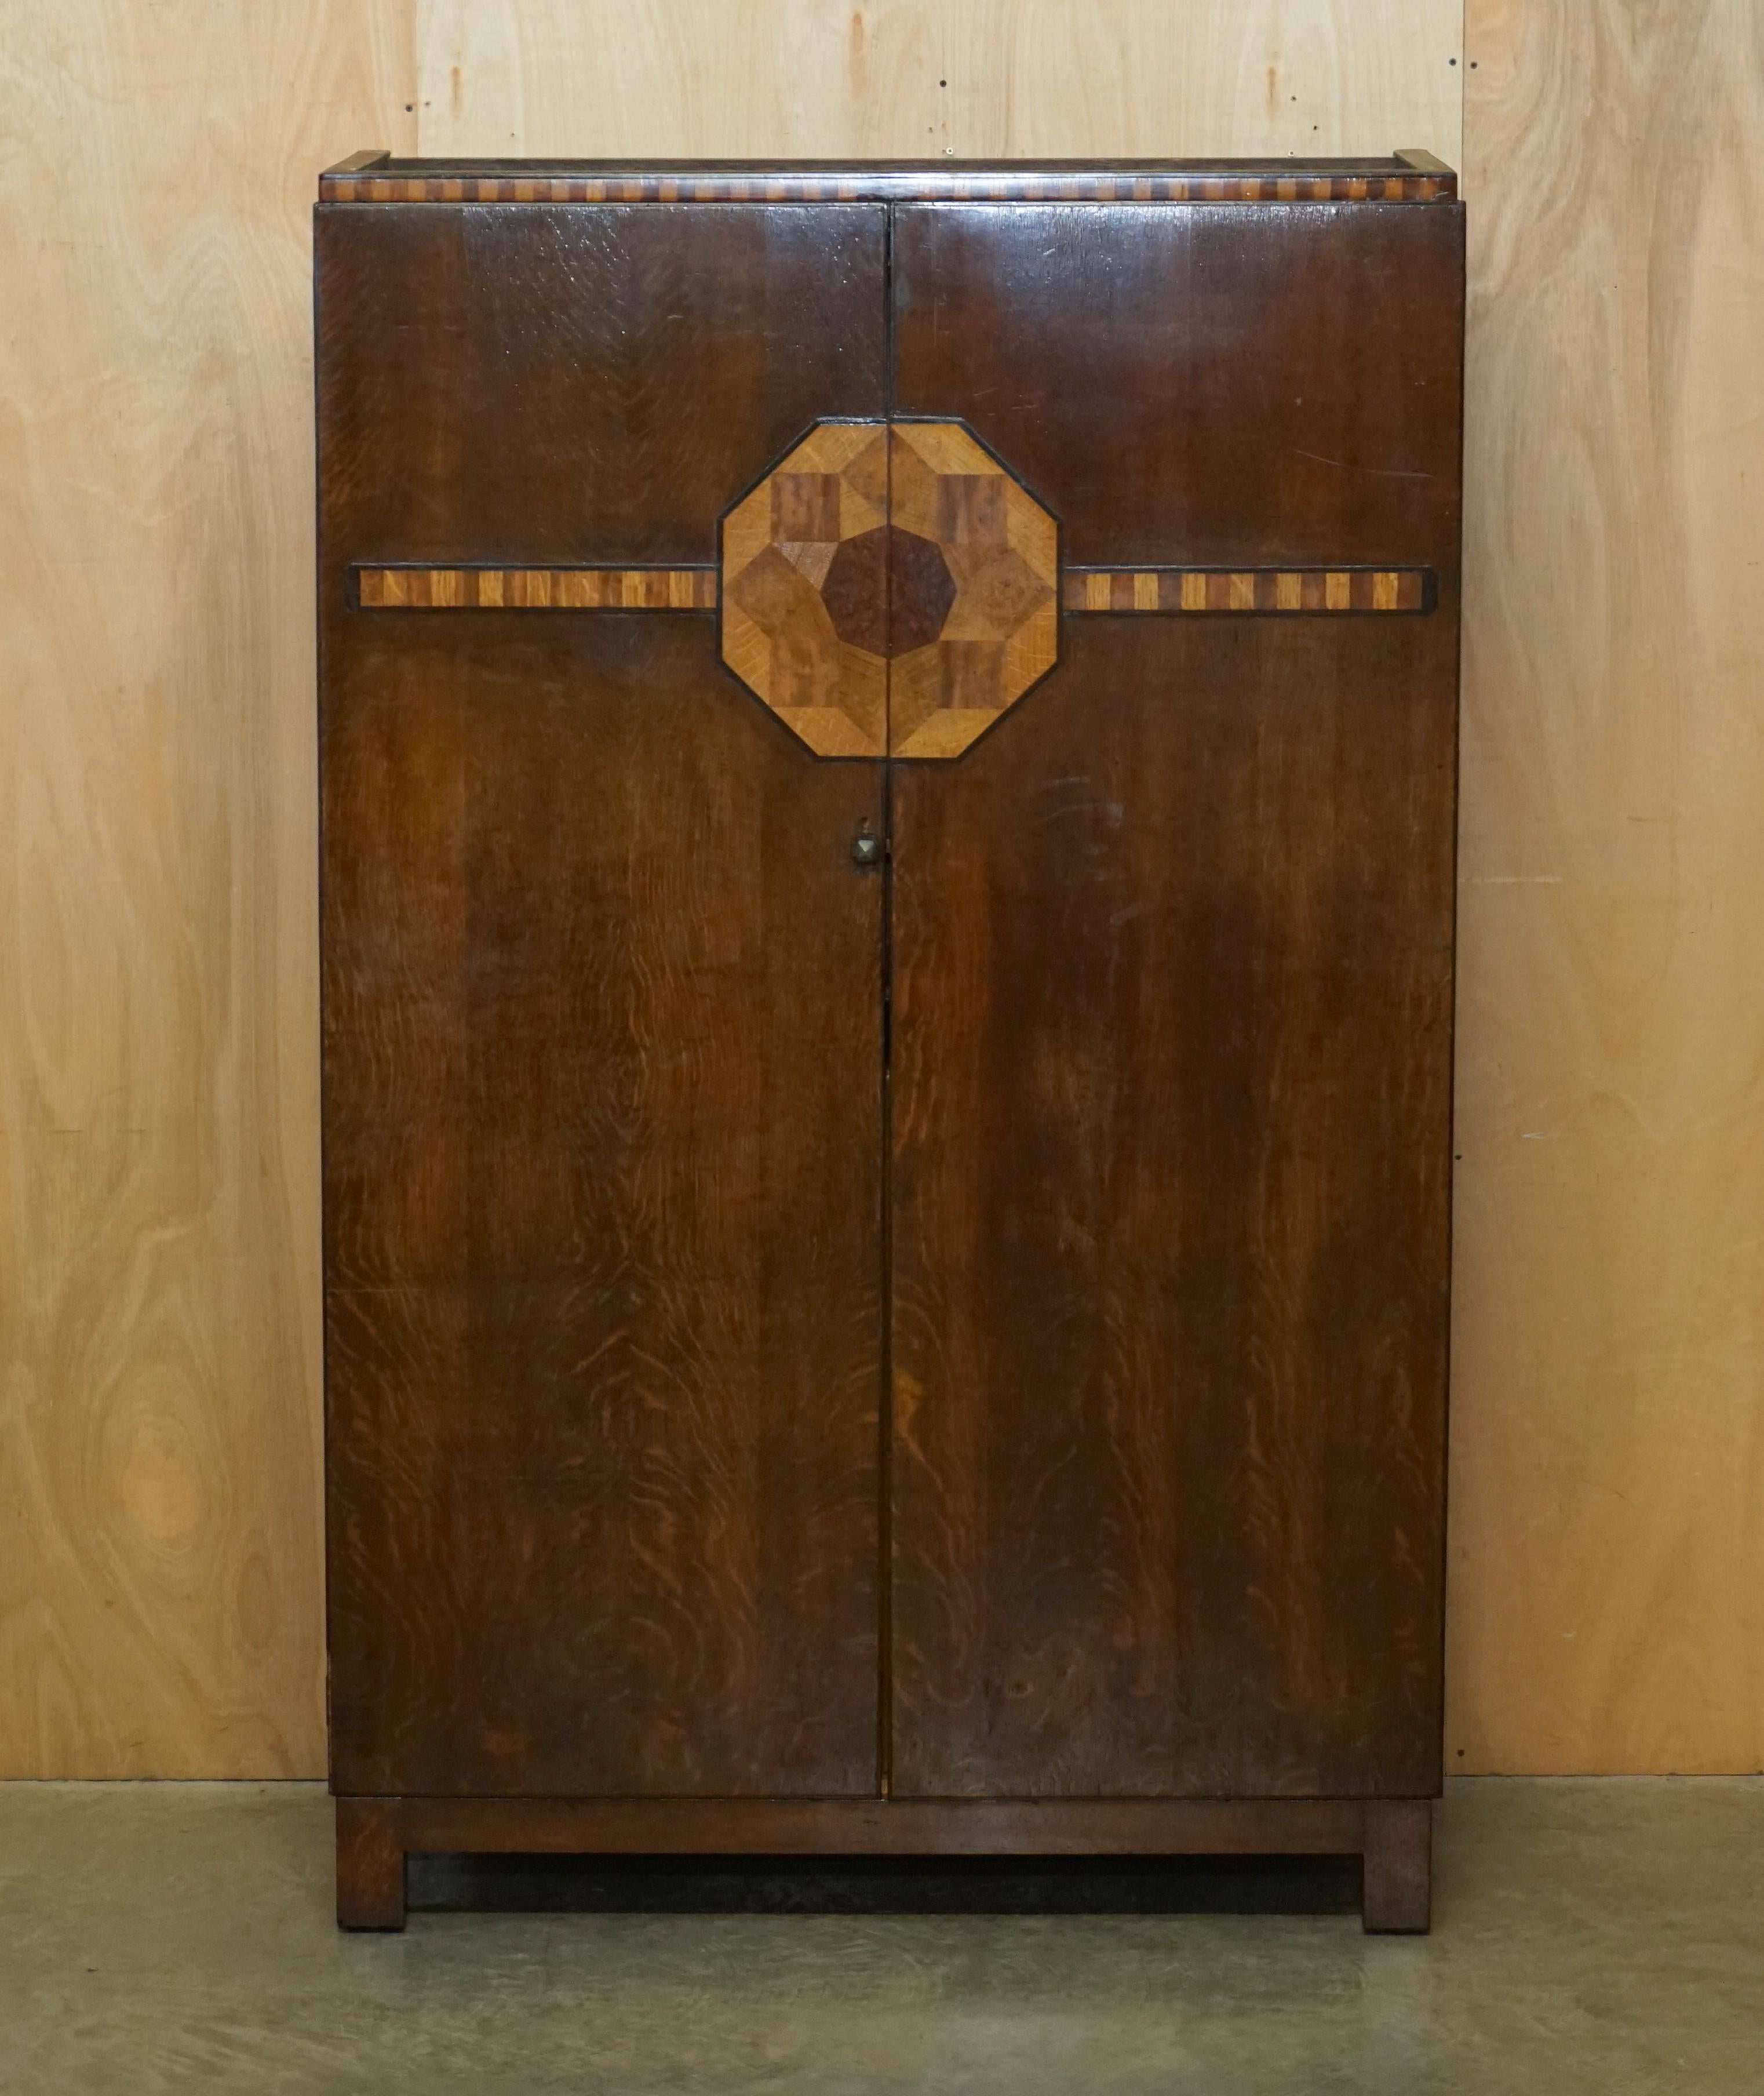 We are delighted to offer for sale this stunning, original circa 1930’s Art Deco large Wardrobe which is part of a suite

As mentioned this piece is part of a suite, in total I have the large wardrobe and the matching dressing table with